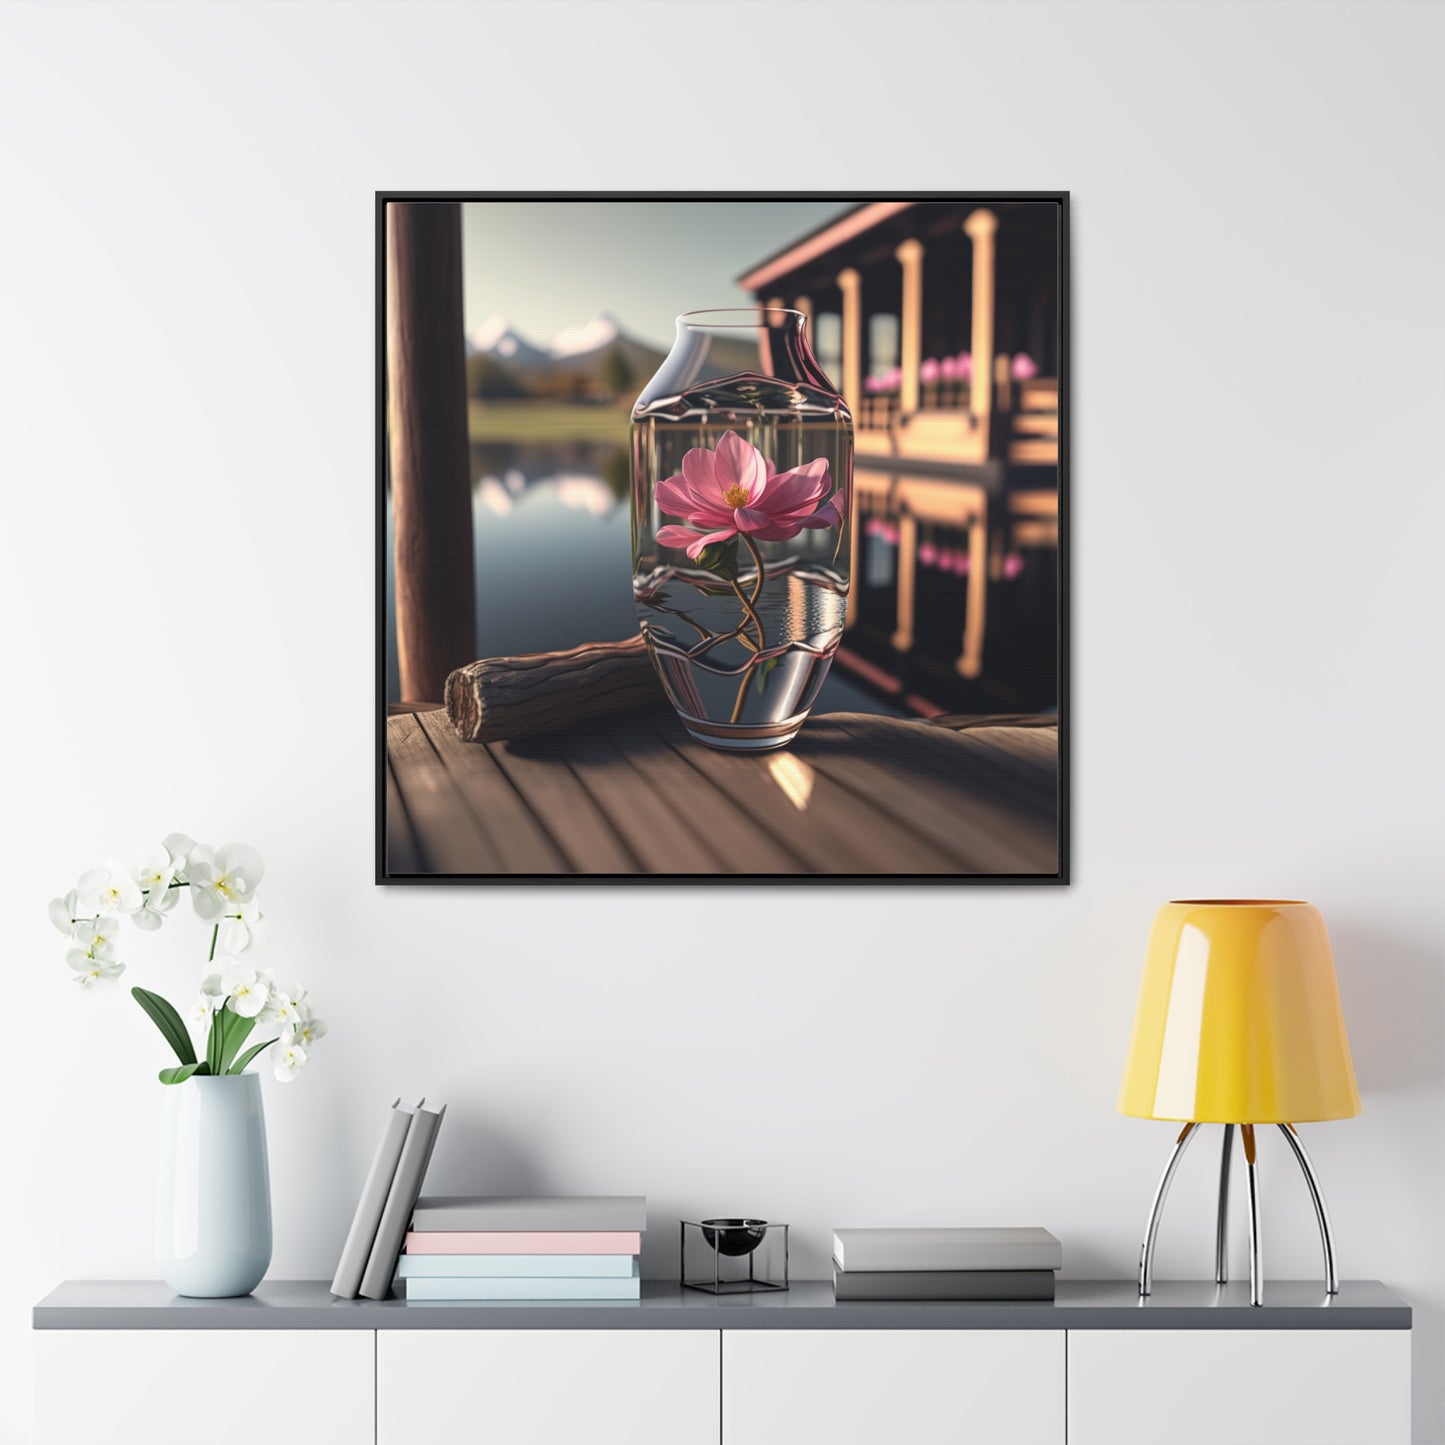 Gallery Canvas Wraps, Square Frame Pink Magnolia 1